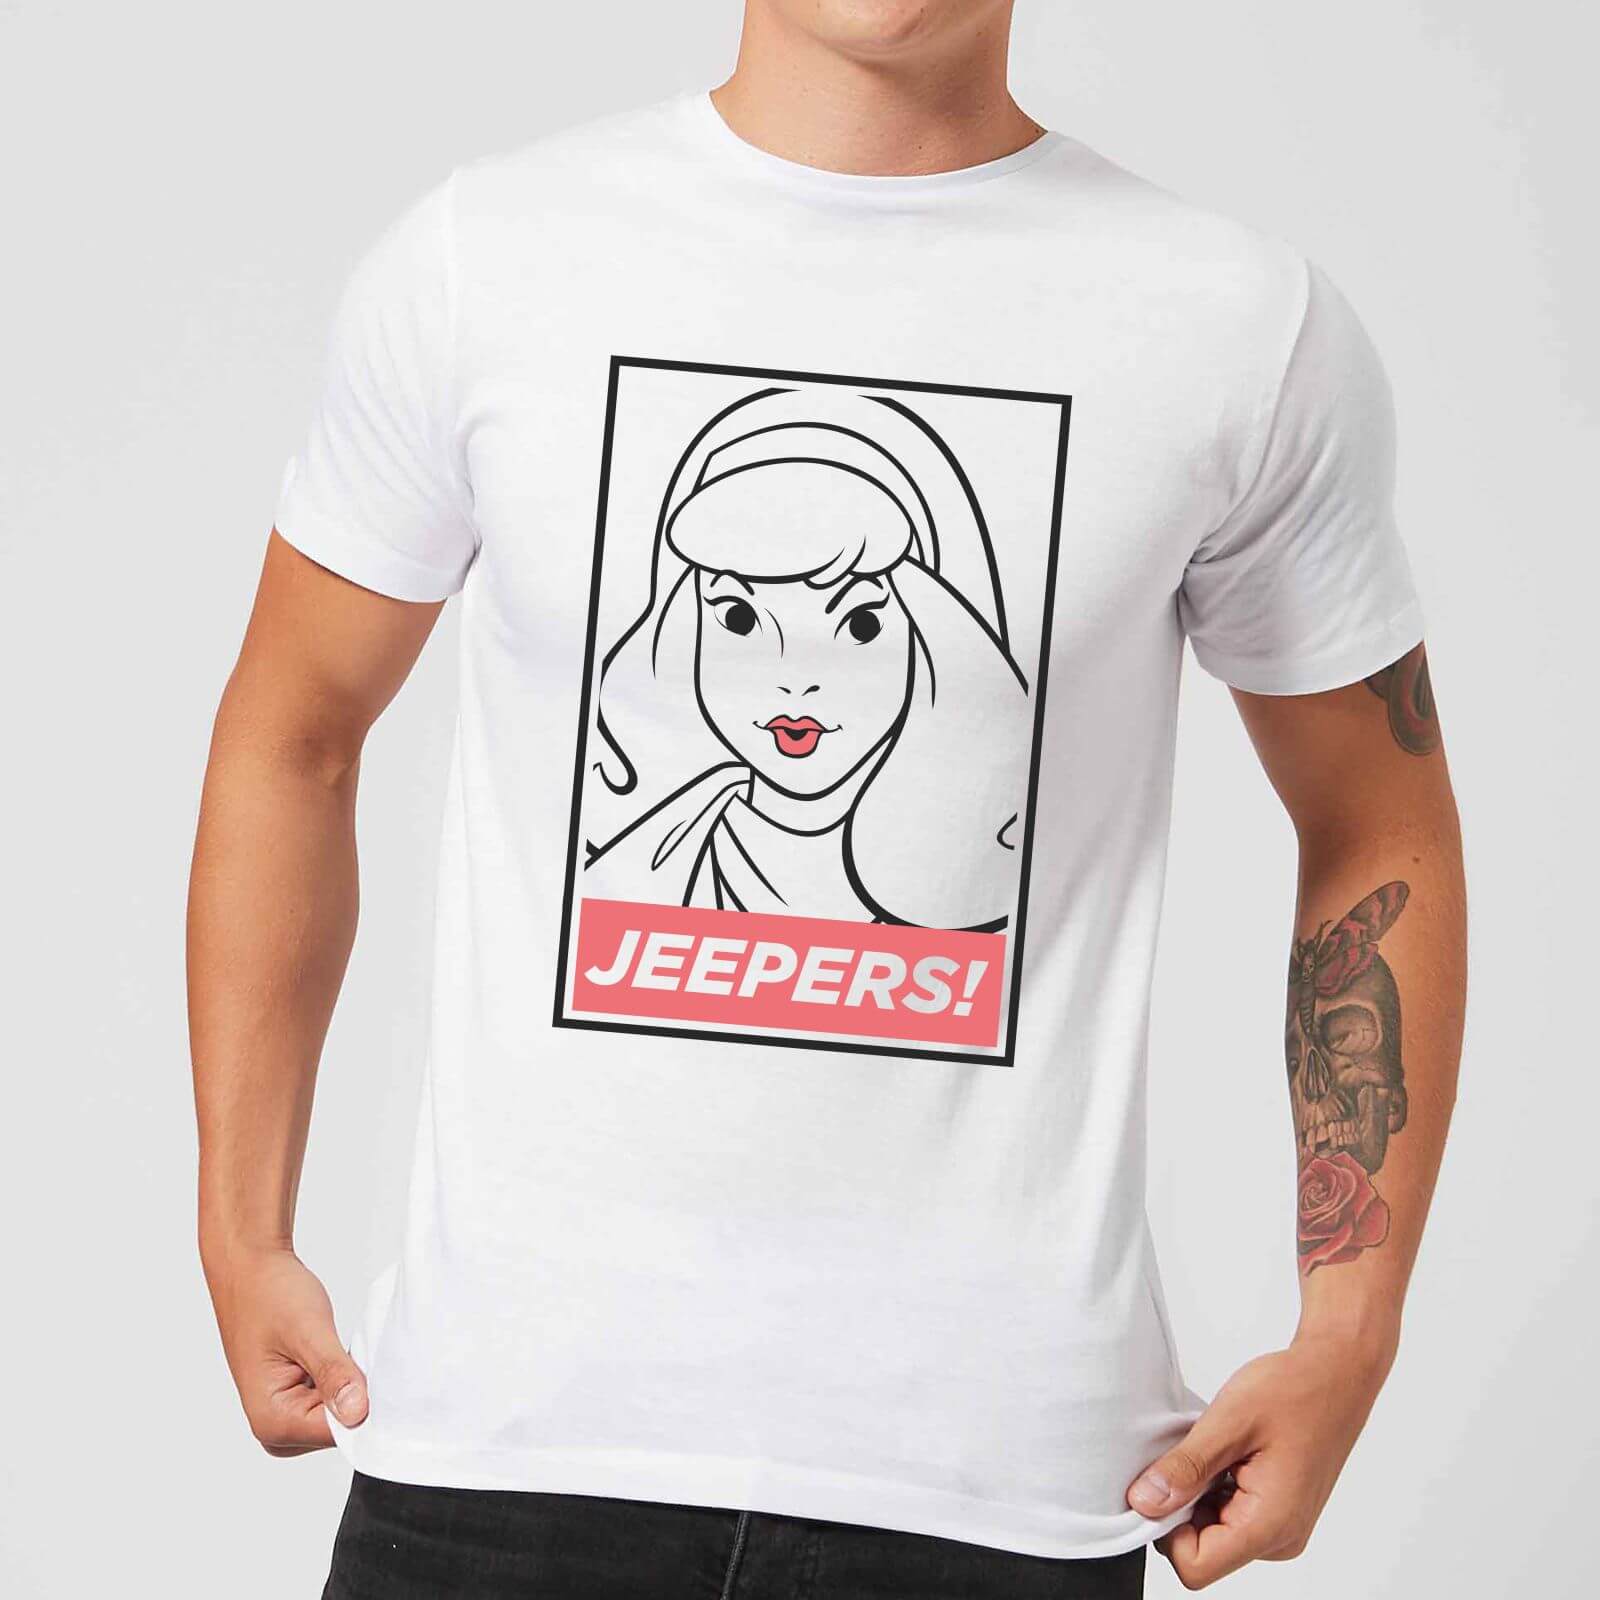 Scooby Doo Jeepers! Men's T-Shirt - White - S